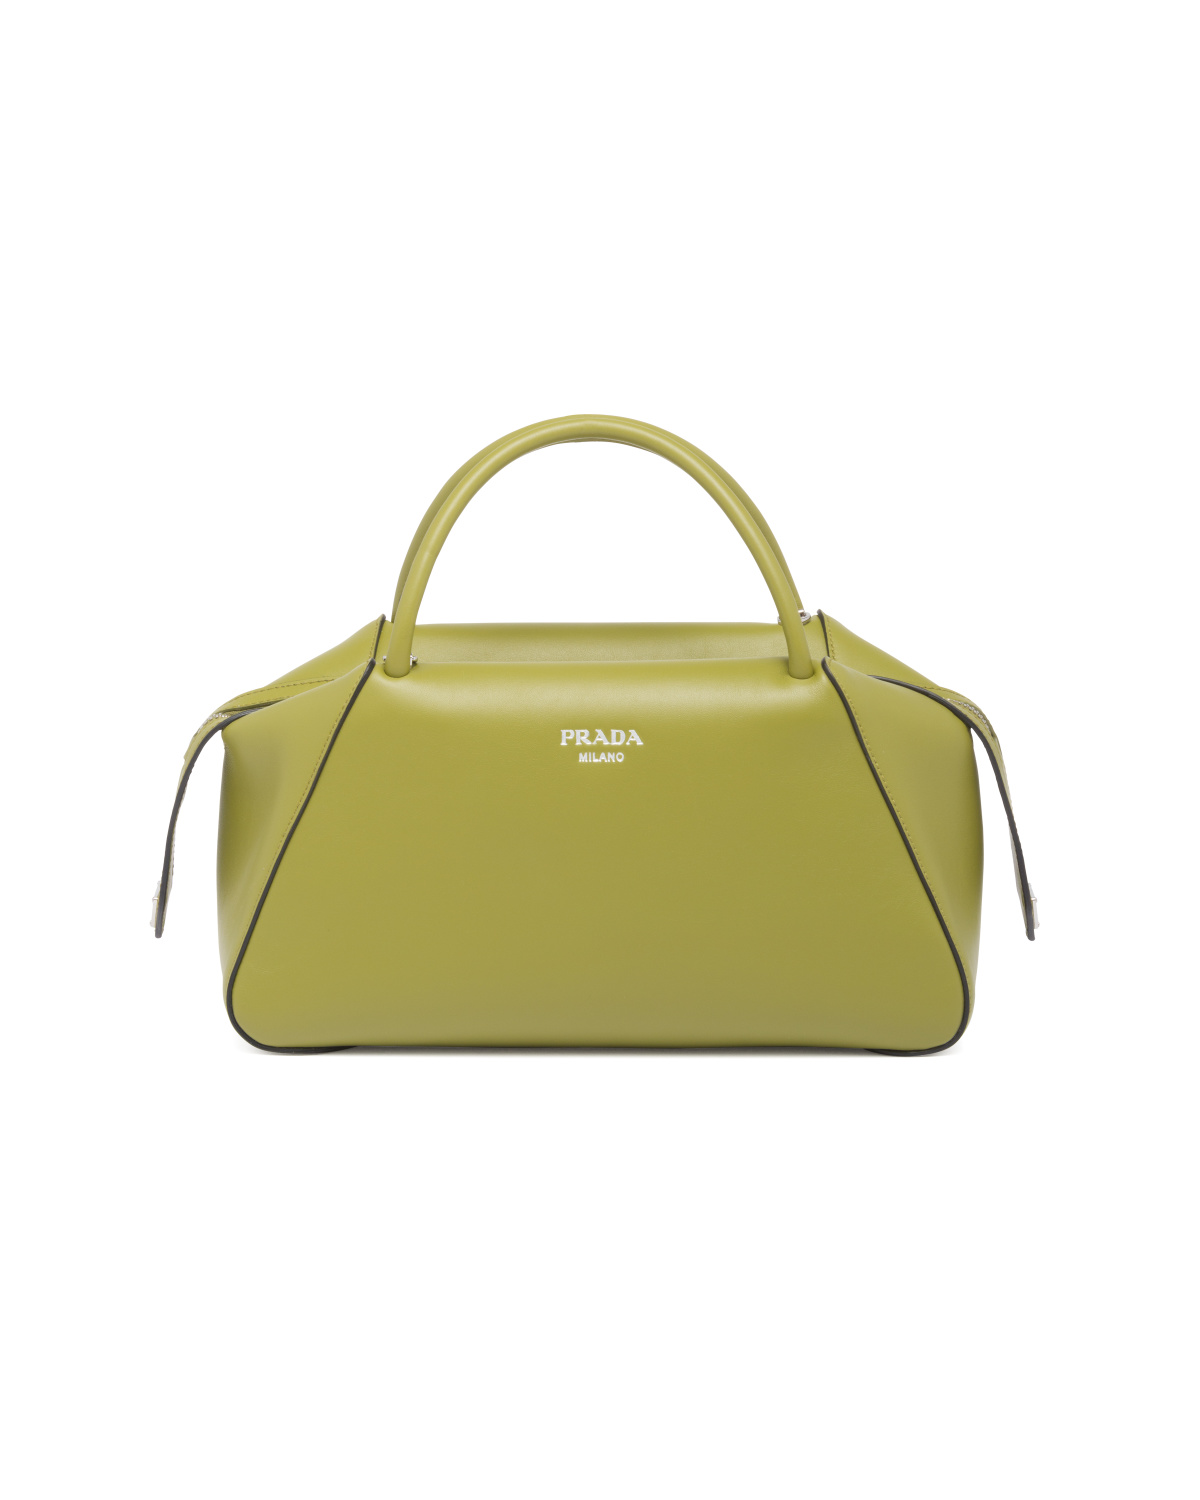 PRADA debuts SUPERNOVA bags in highly-polished Spazzolato leather